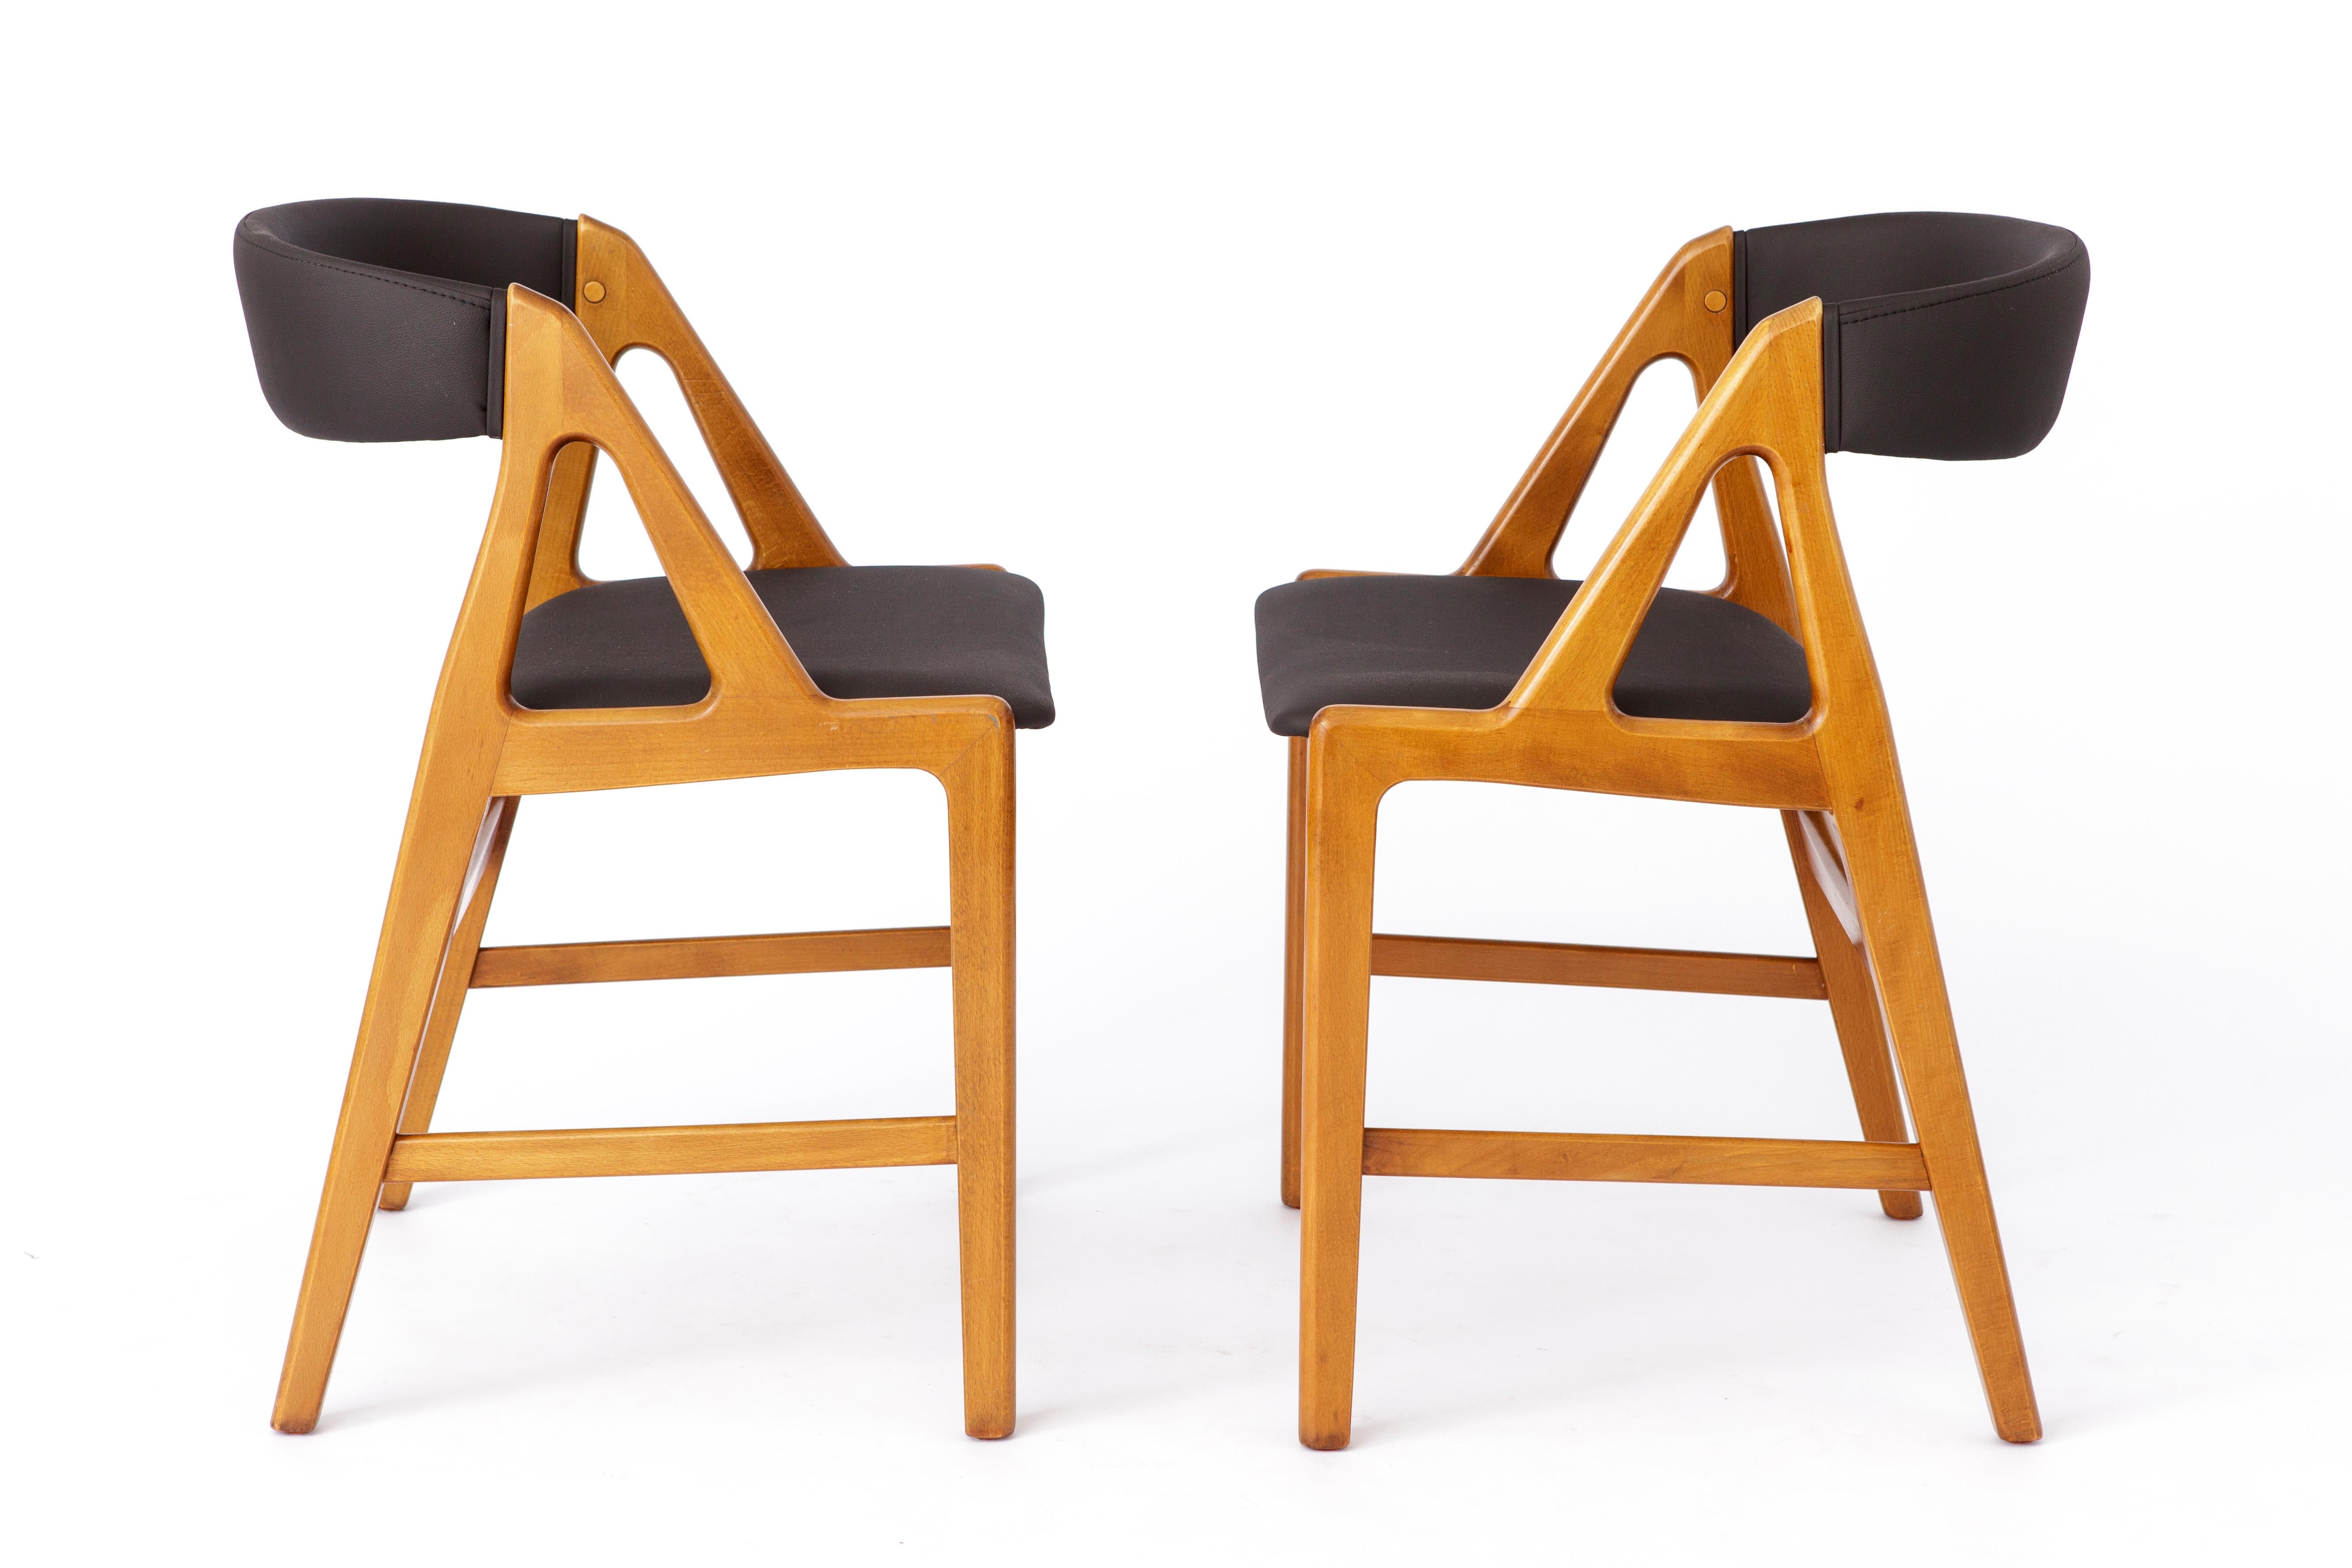 2 vintage dining chairs from the 1960s. 
Designed by Danish furniture designer Henning Kjaernulf. 
Model: 72. 
Displayed price is for 2 chairs. 

Very good condition. Stable dyed beech frames. 
Reupholstered with black skai material (artificial